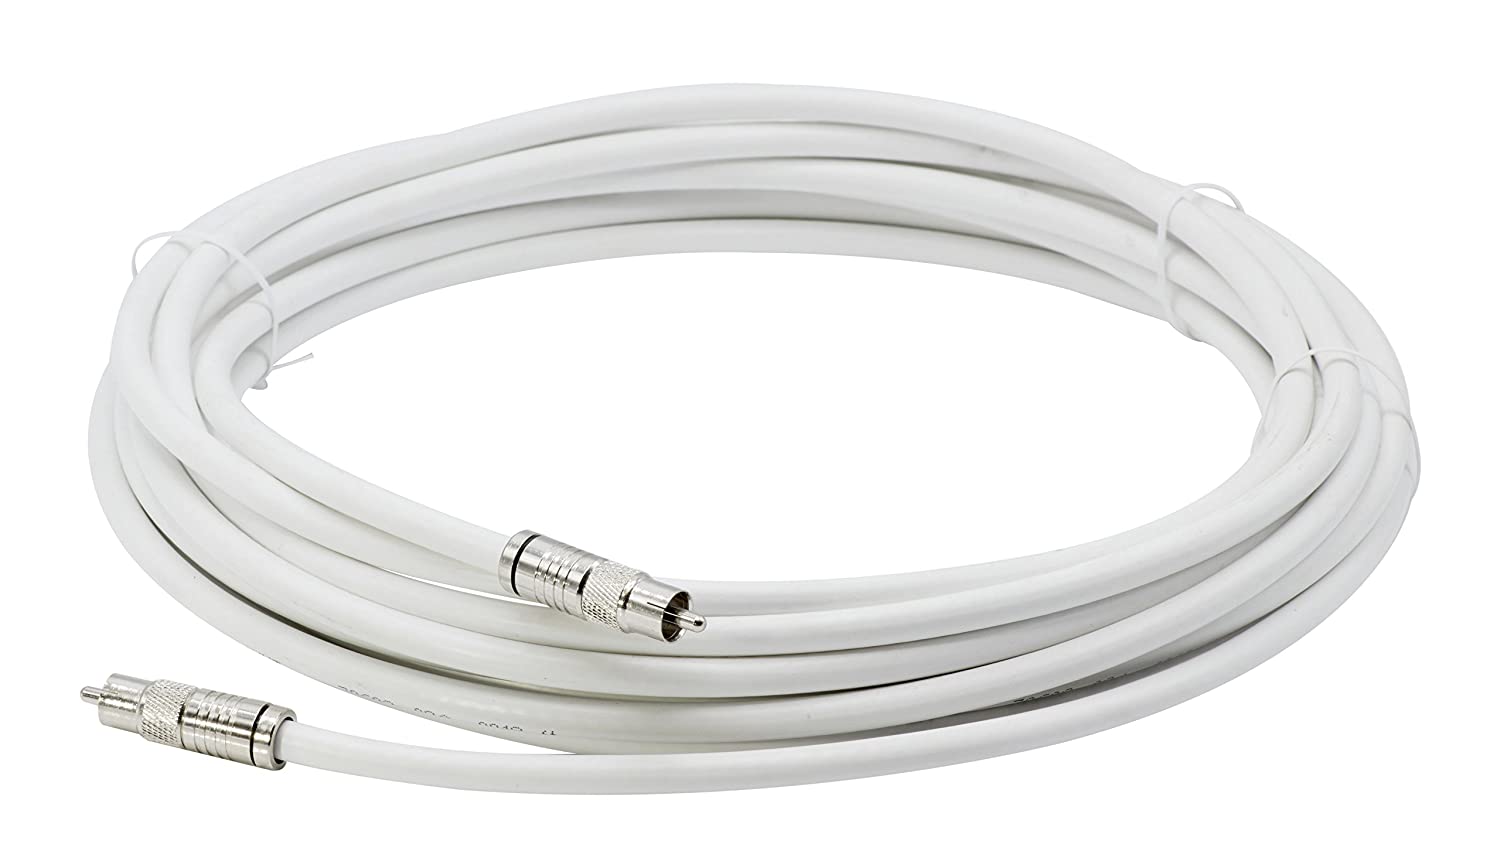 THE CIMPLE CO - White Digital Audio Coaxial Cable Subwoofer Cable - (S/PDIF) RCA Cable, 200 Feet - image 1 of 6